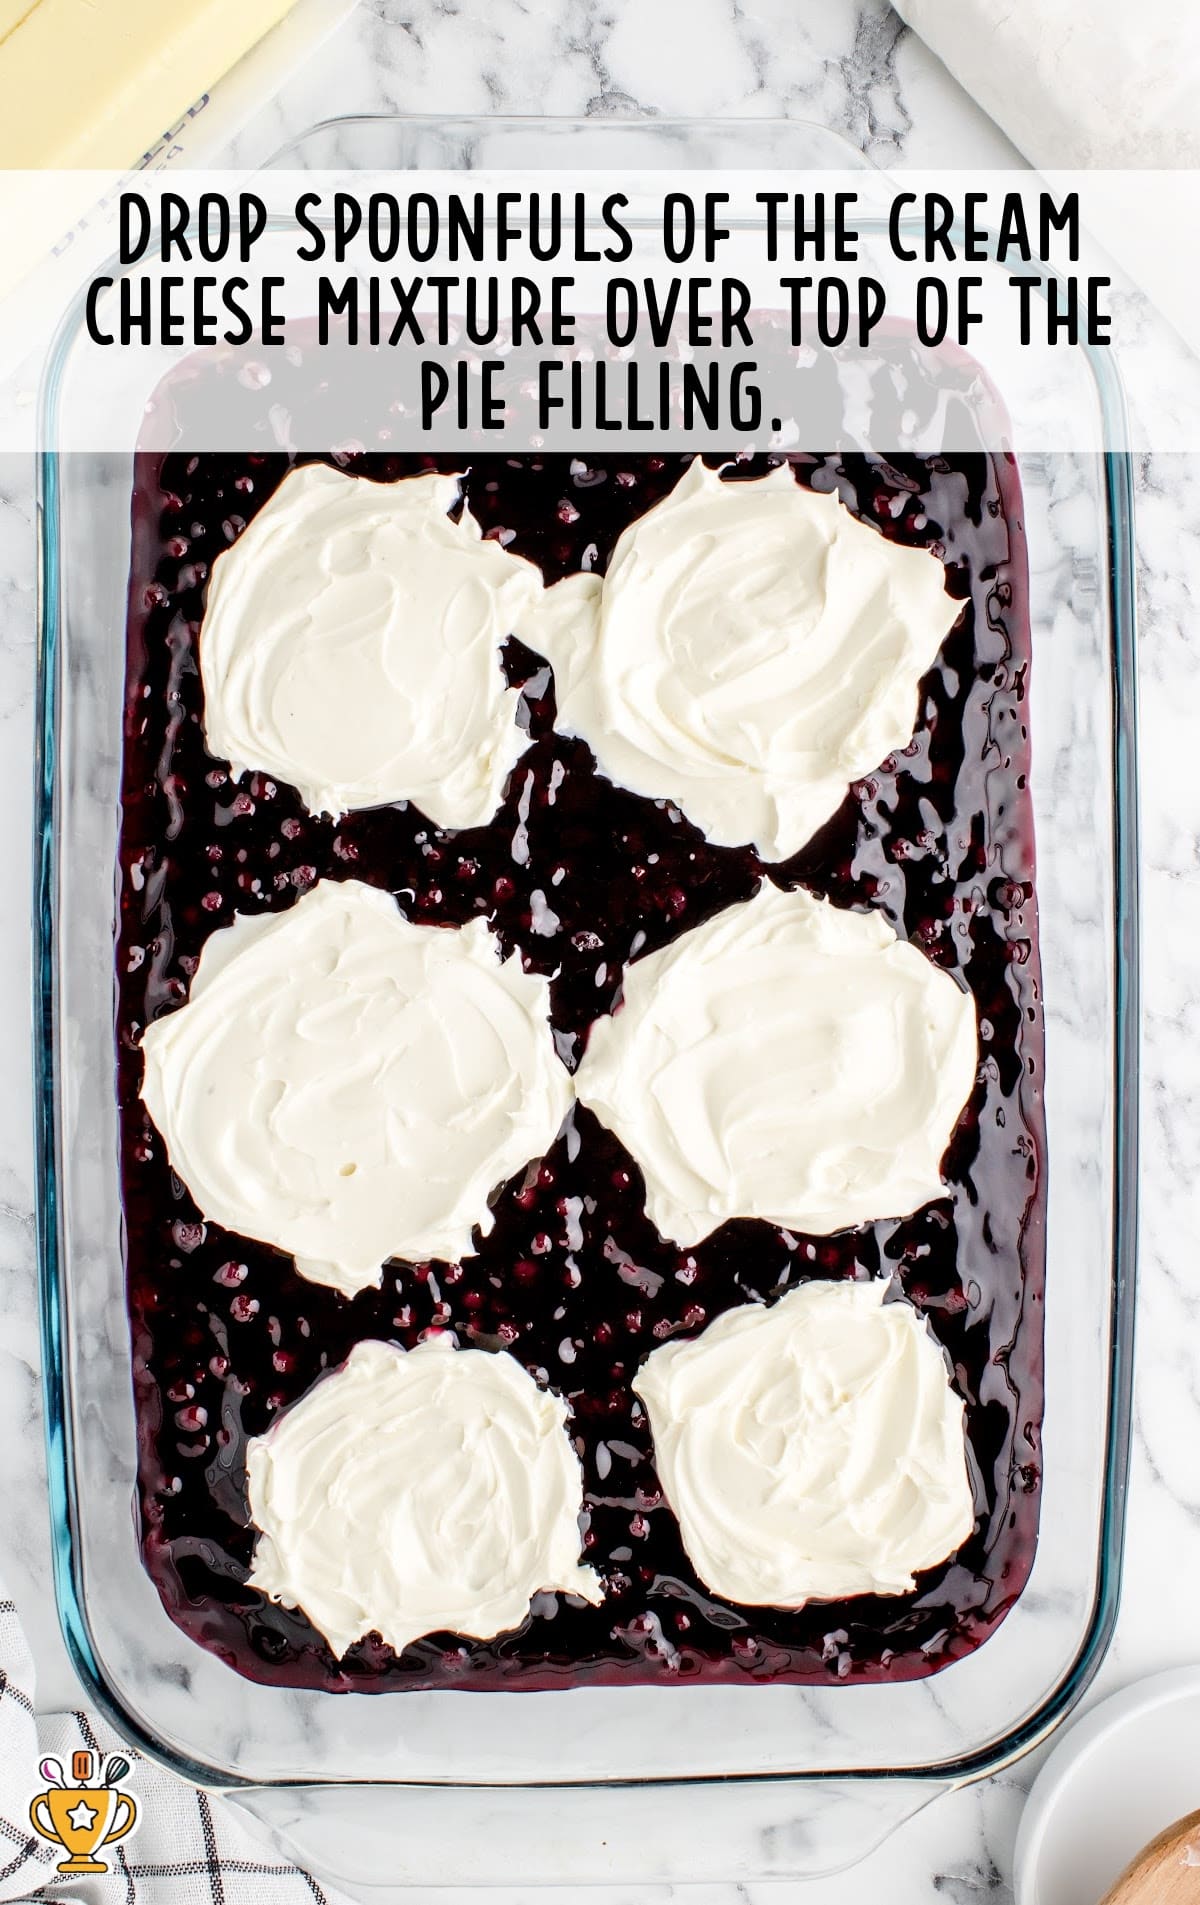 blueberry pie filling with a sweet cream cheese mixture in a 9x13 baking dish